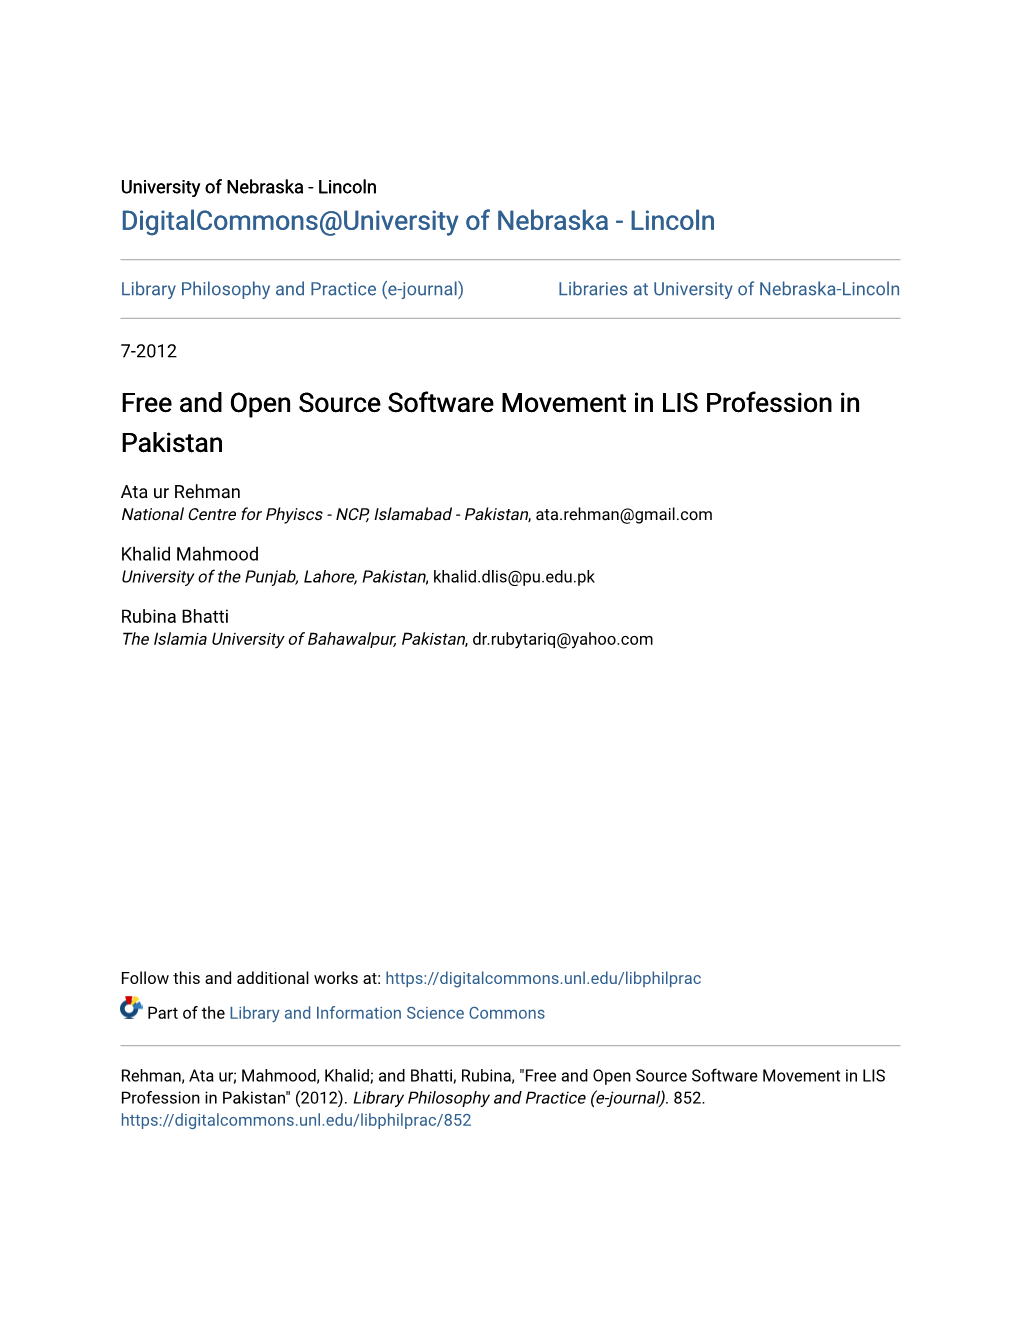 Free and Open Source Software Movement in LIS Profession in Pakistan